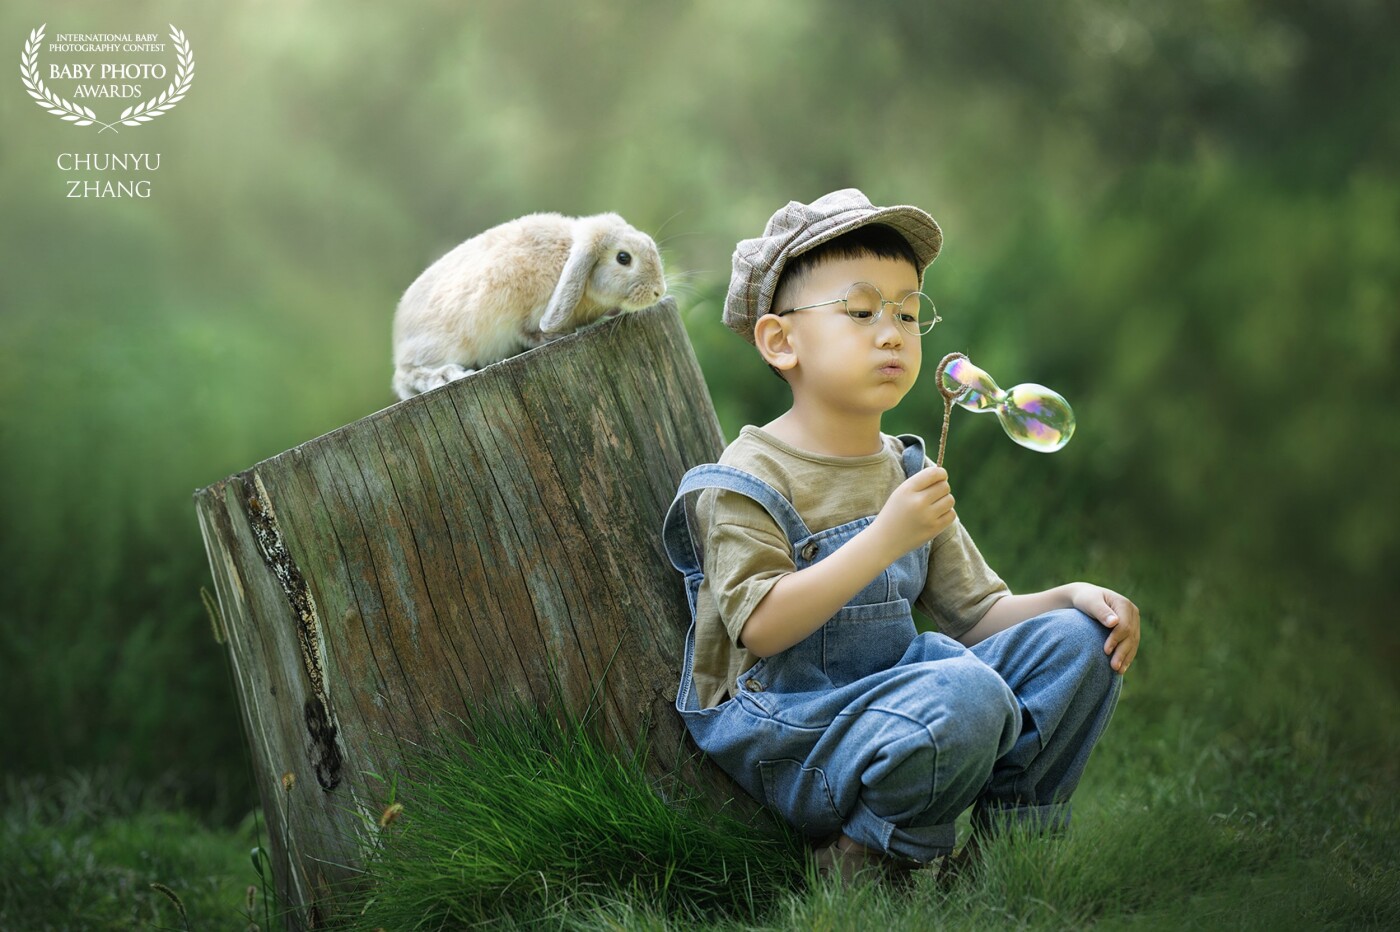 The little boy and the little rabbit came to play in the forest. The boy put the rabbit on the tree stump and began to blow bubbles. Then the rabbit came over to watch him blow bubbles